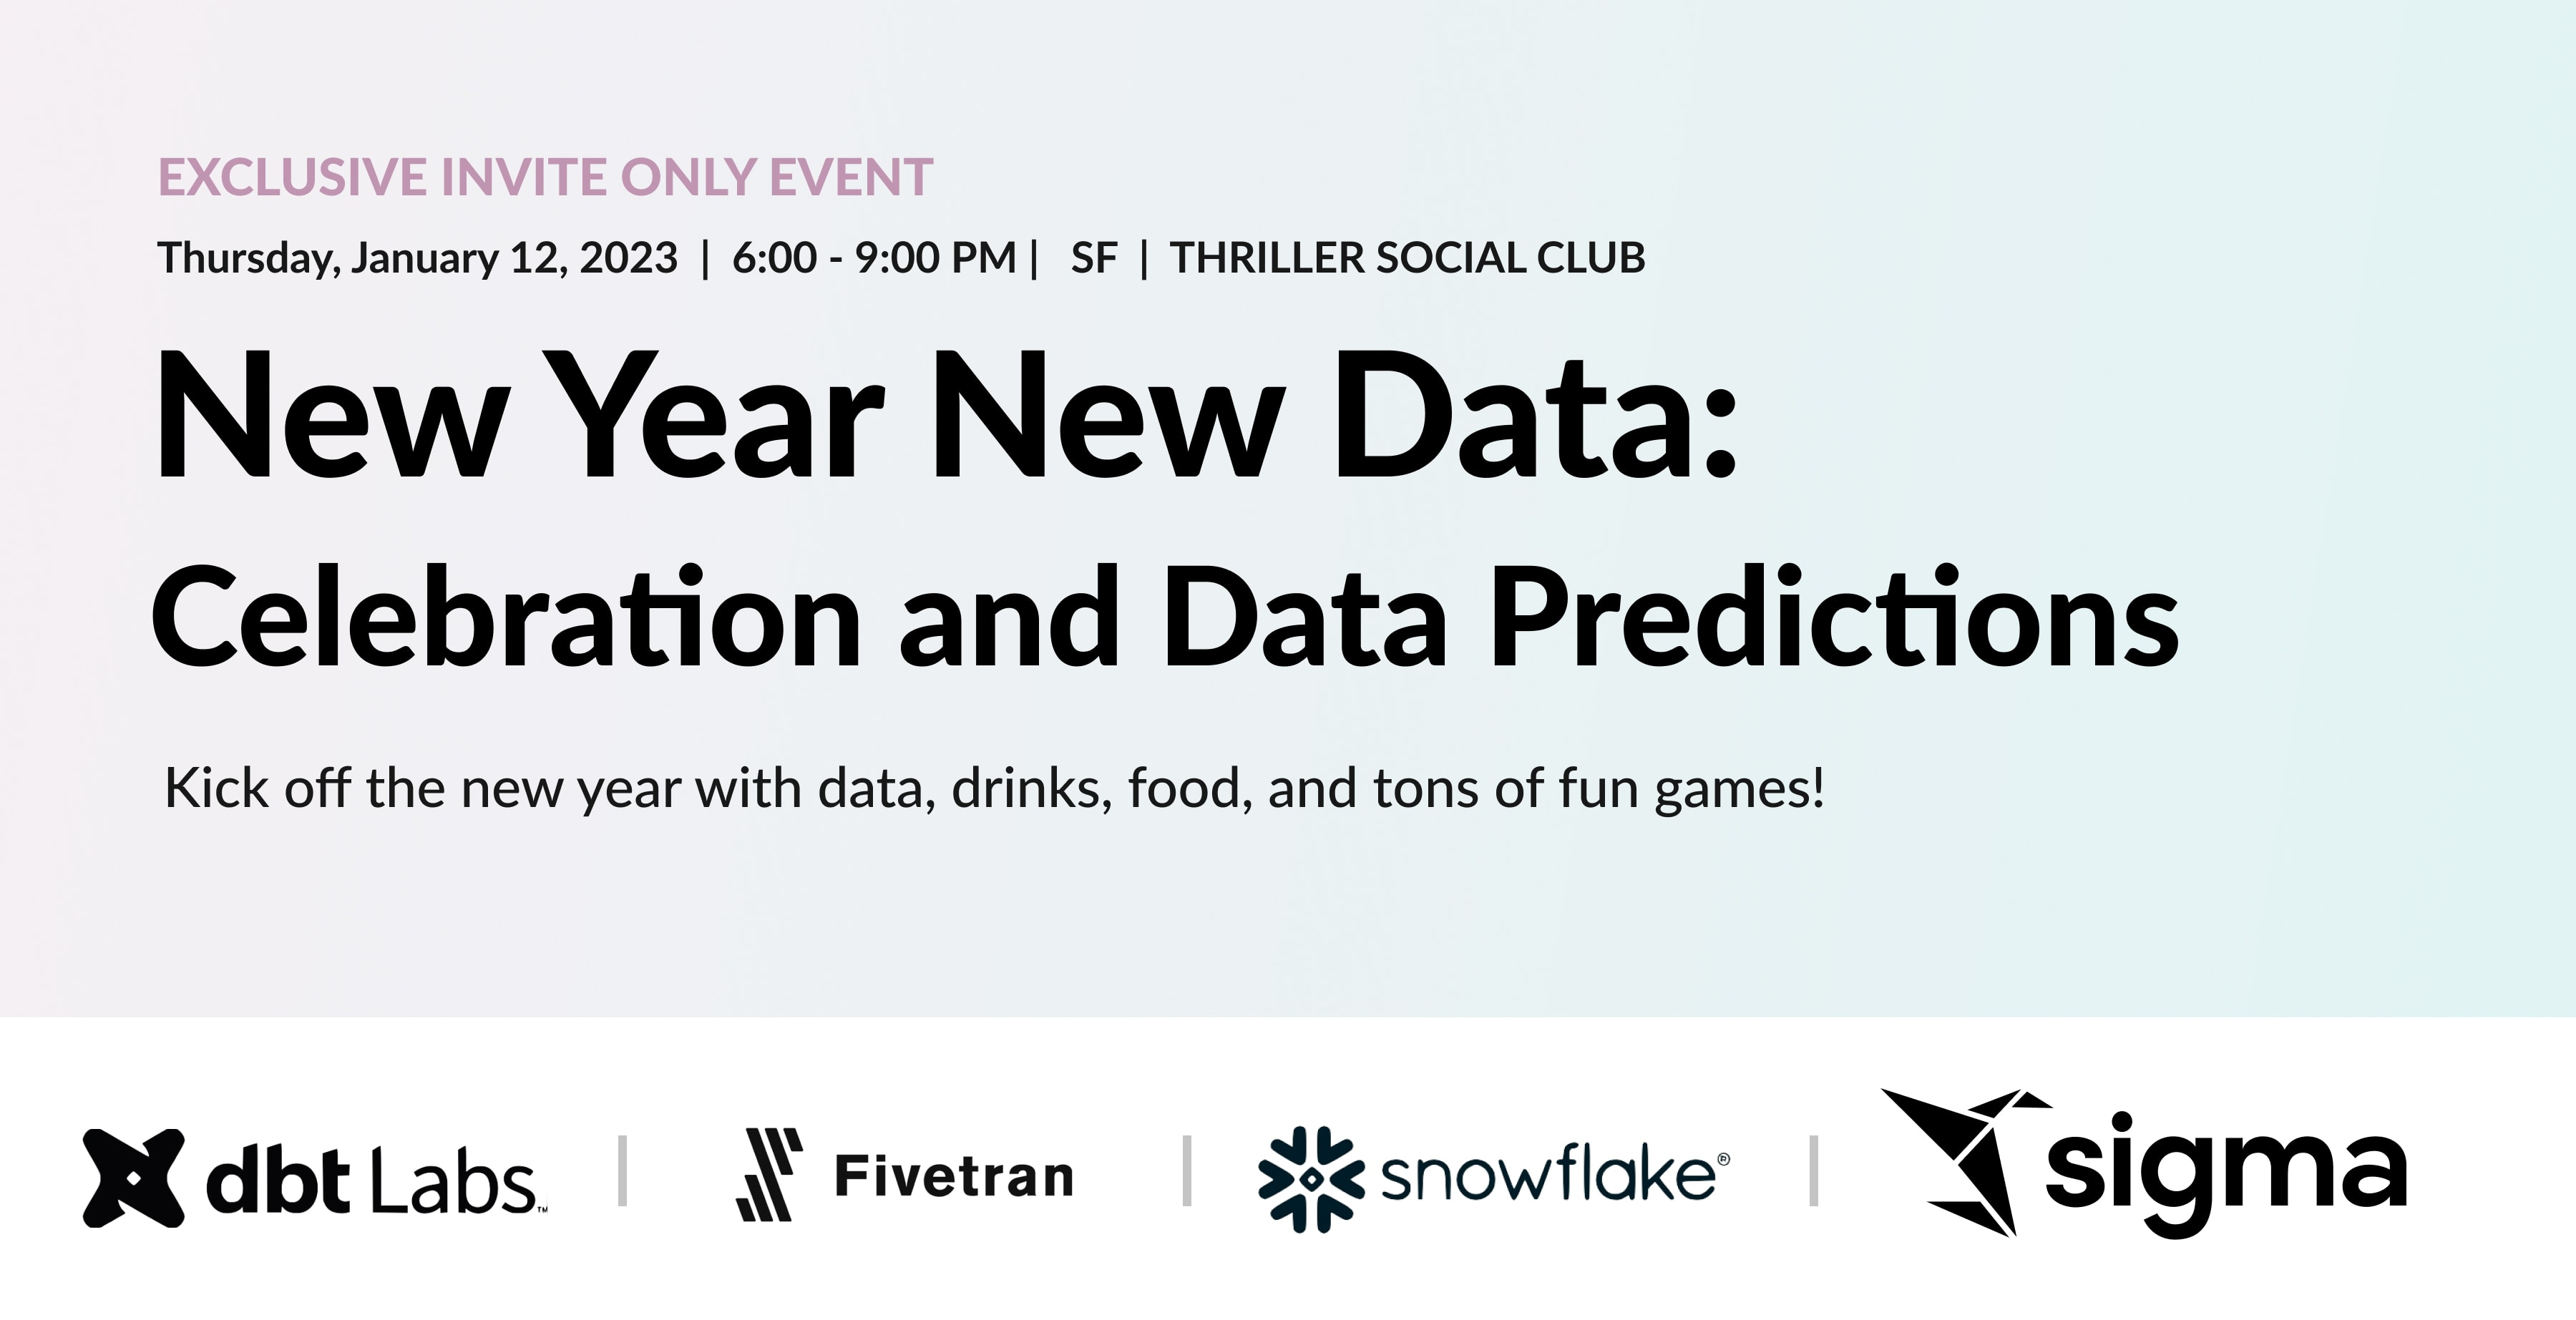 New Year, New Data: Celebration and Data Predictions